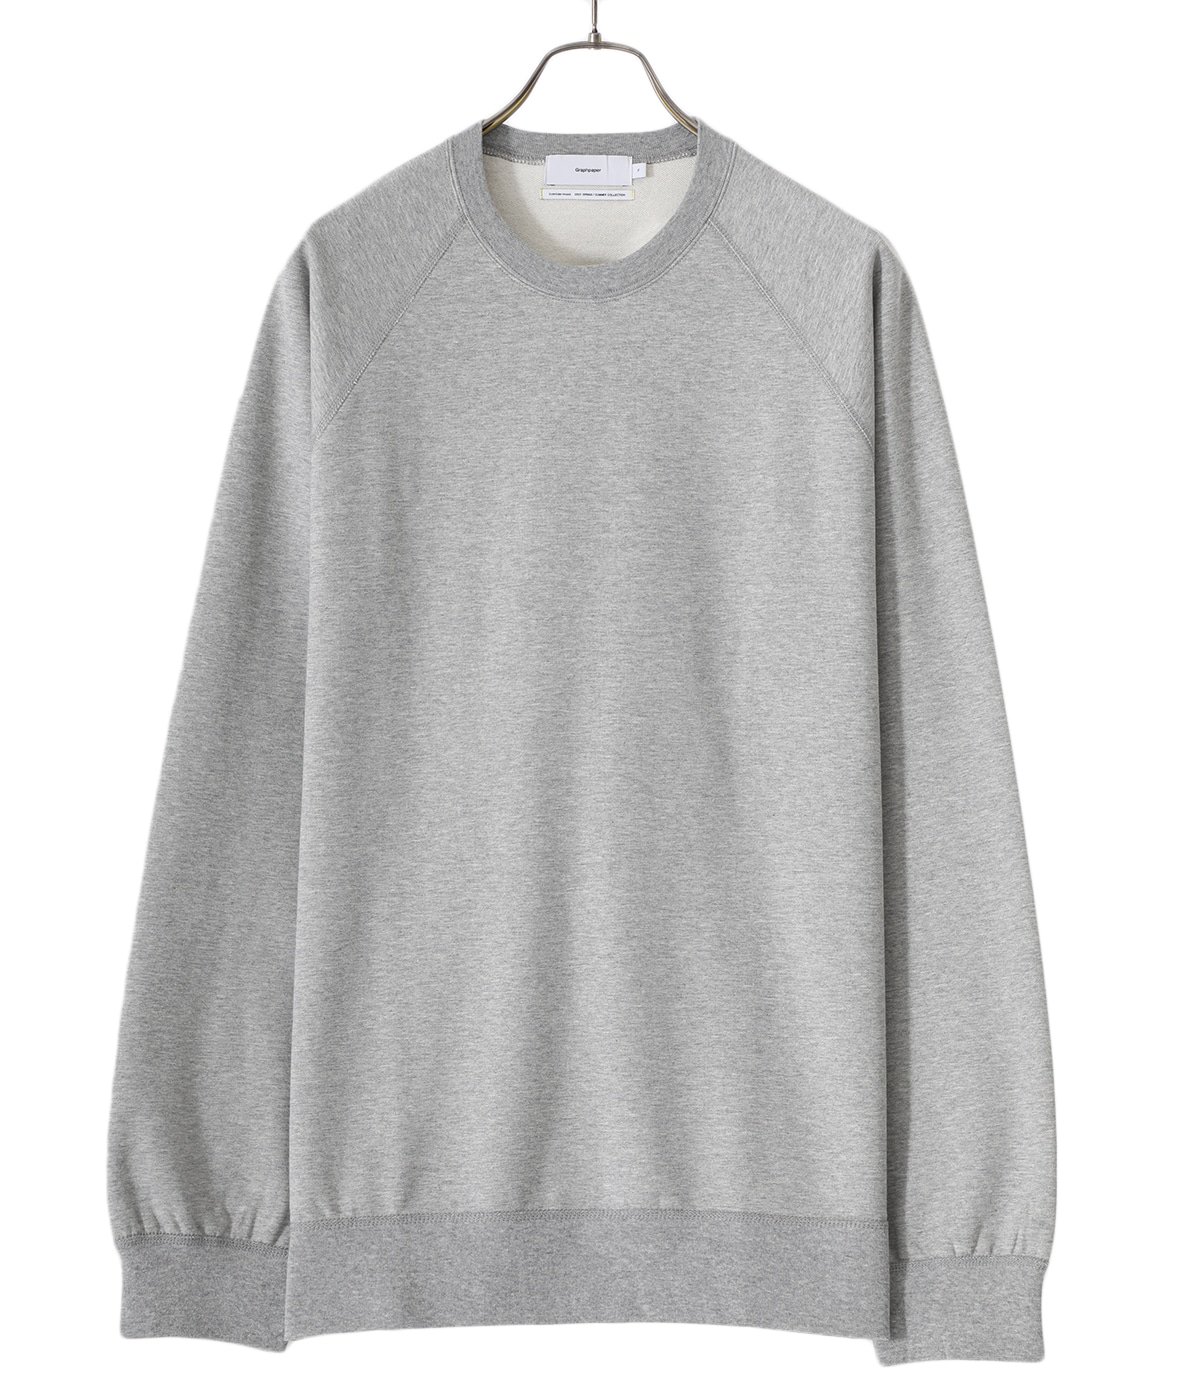 Ultra Compact Terry Crew Neck Sweater Graphpaper(グラフペーパー) トップス スウェット  (メンズ)の通販 ARKnets(アークネッツ) 公式通販 【正規取扱店】